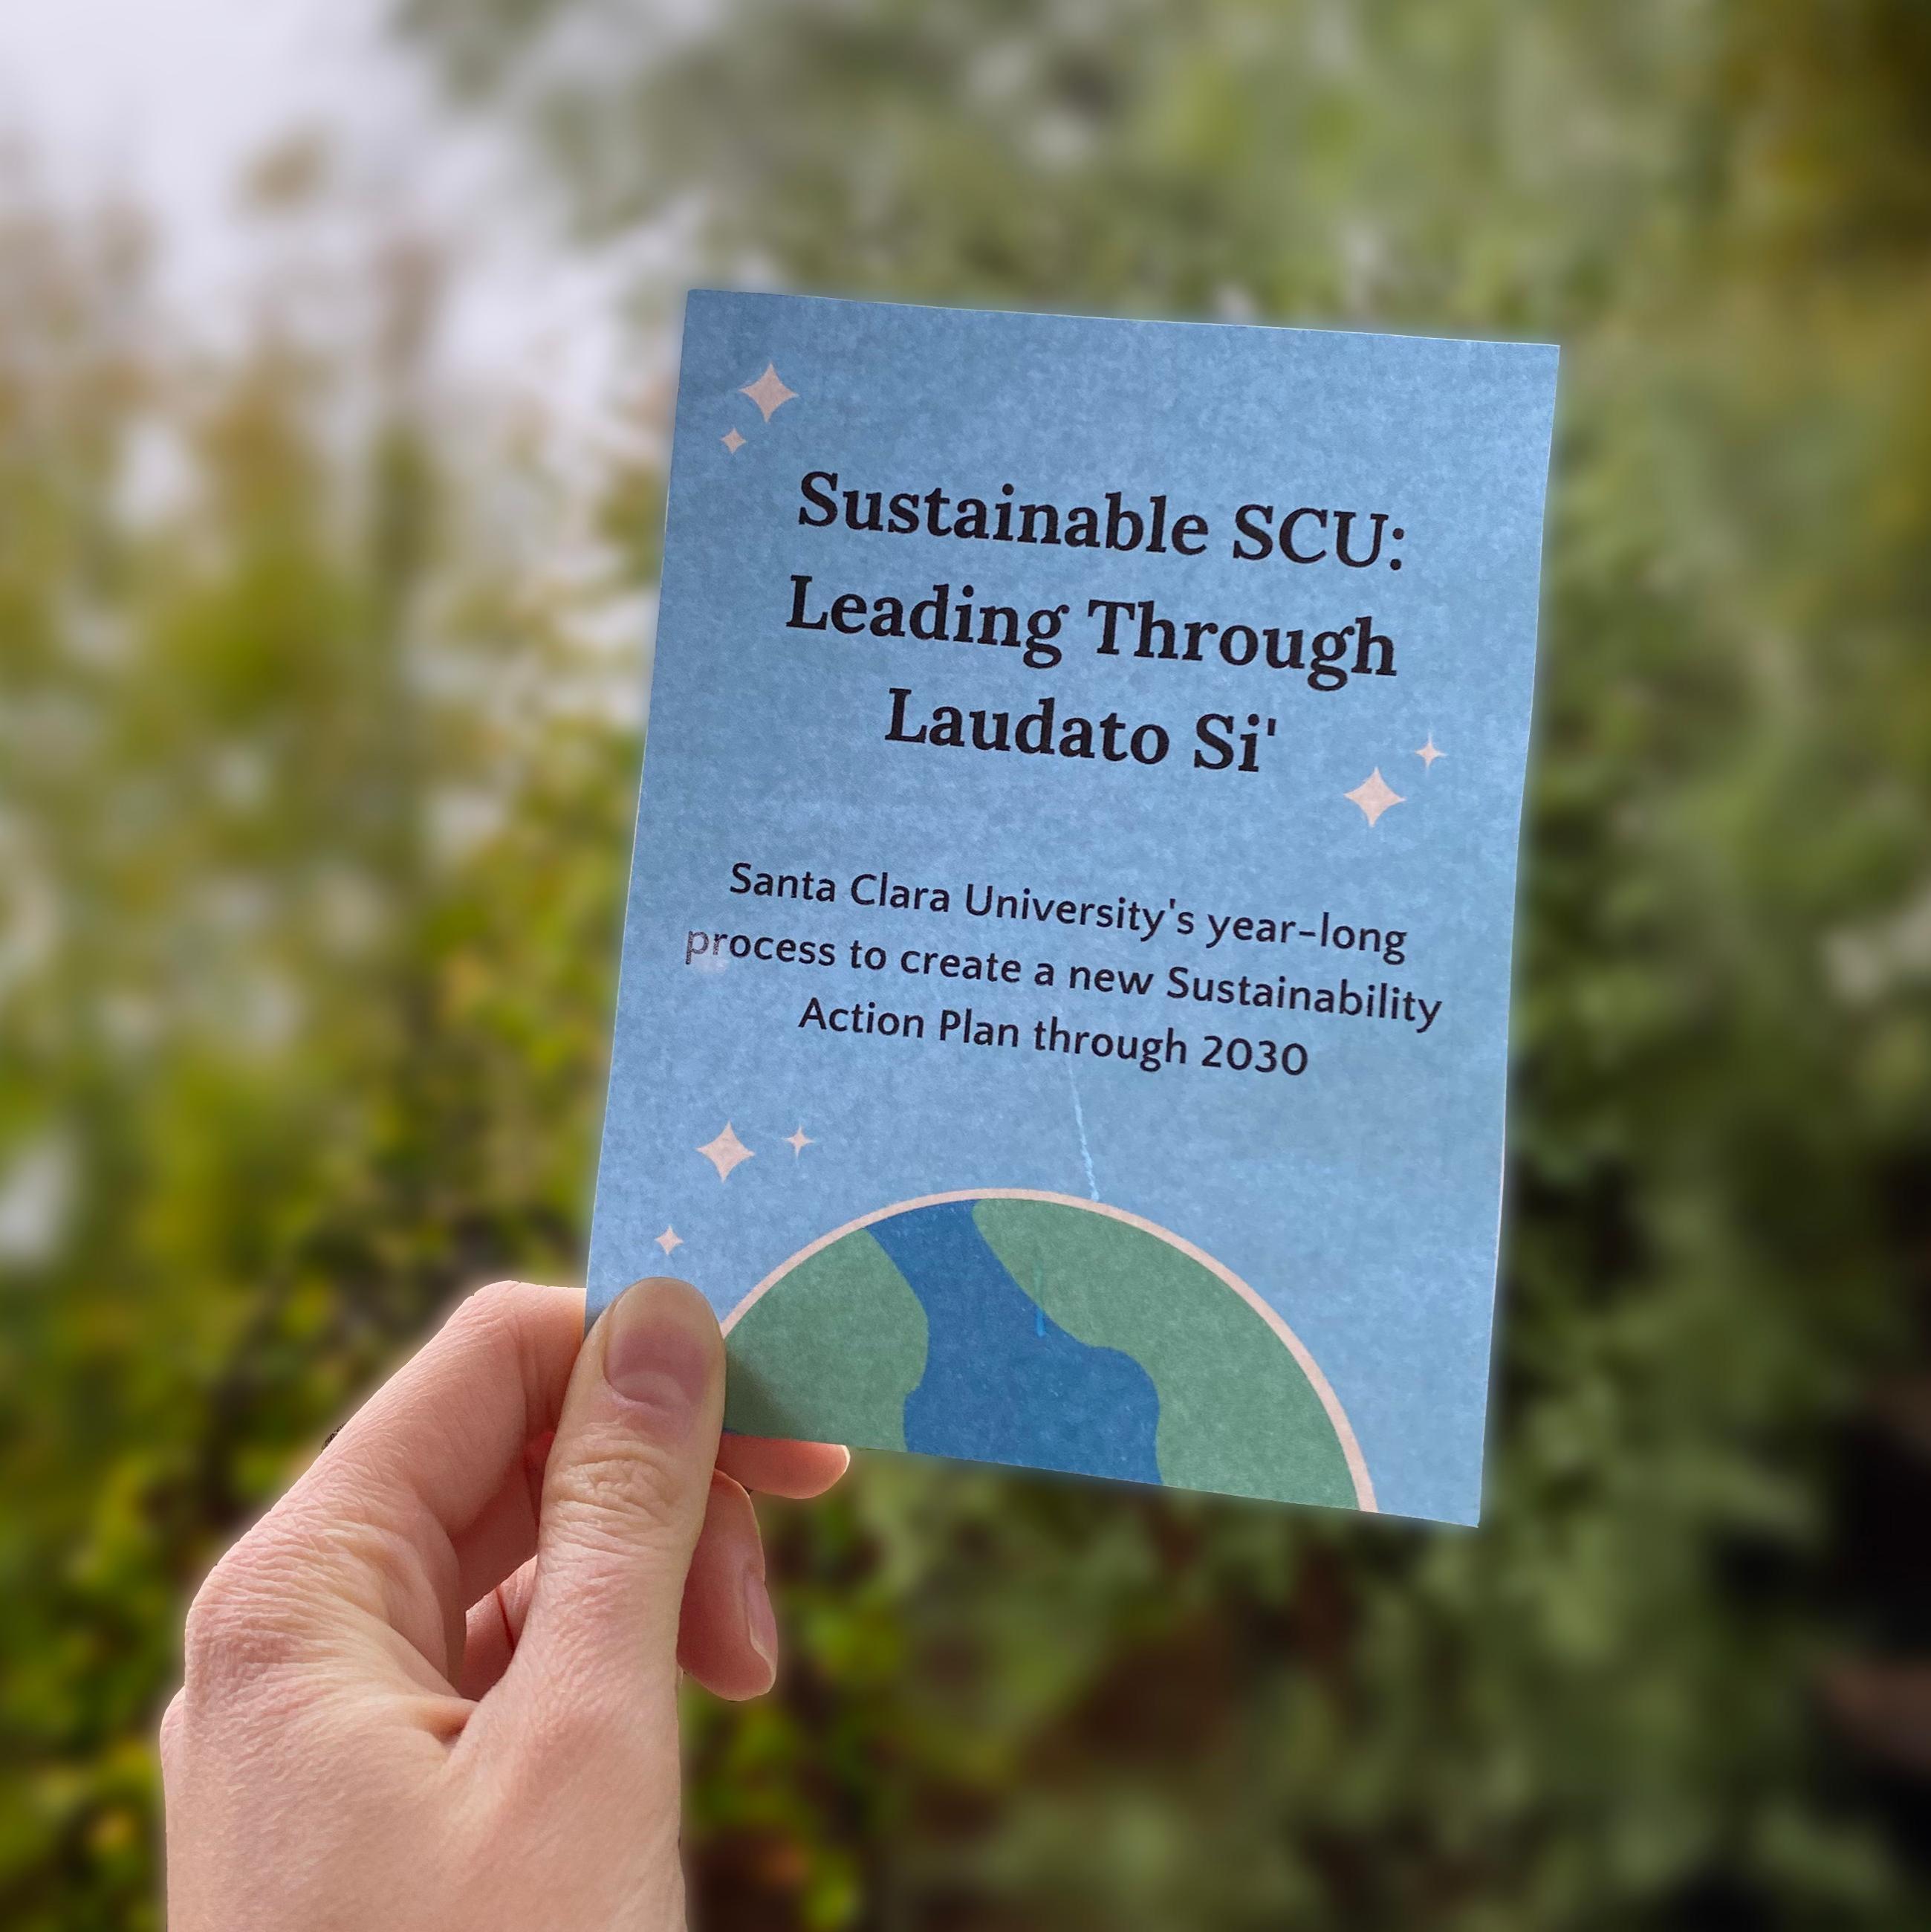 A hand holding up a card about Leading Through Laudato Si against a background of trees